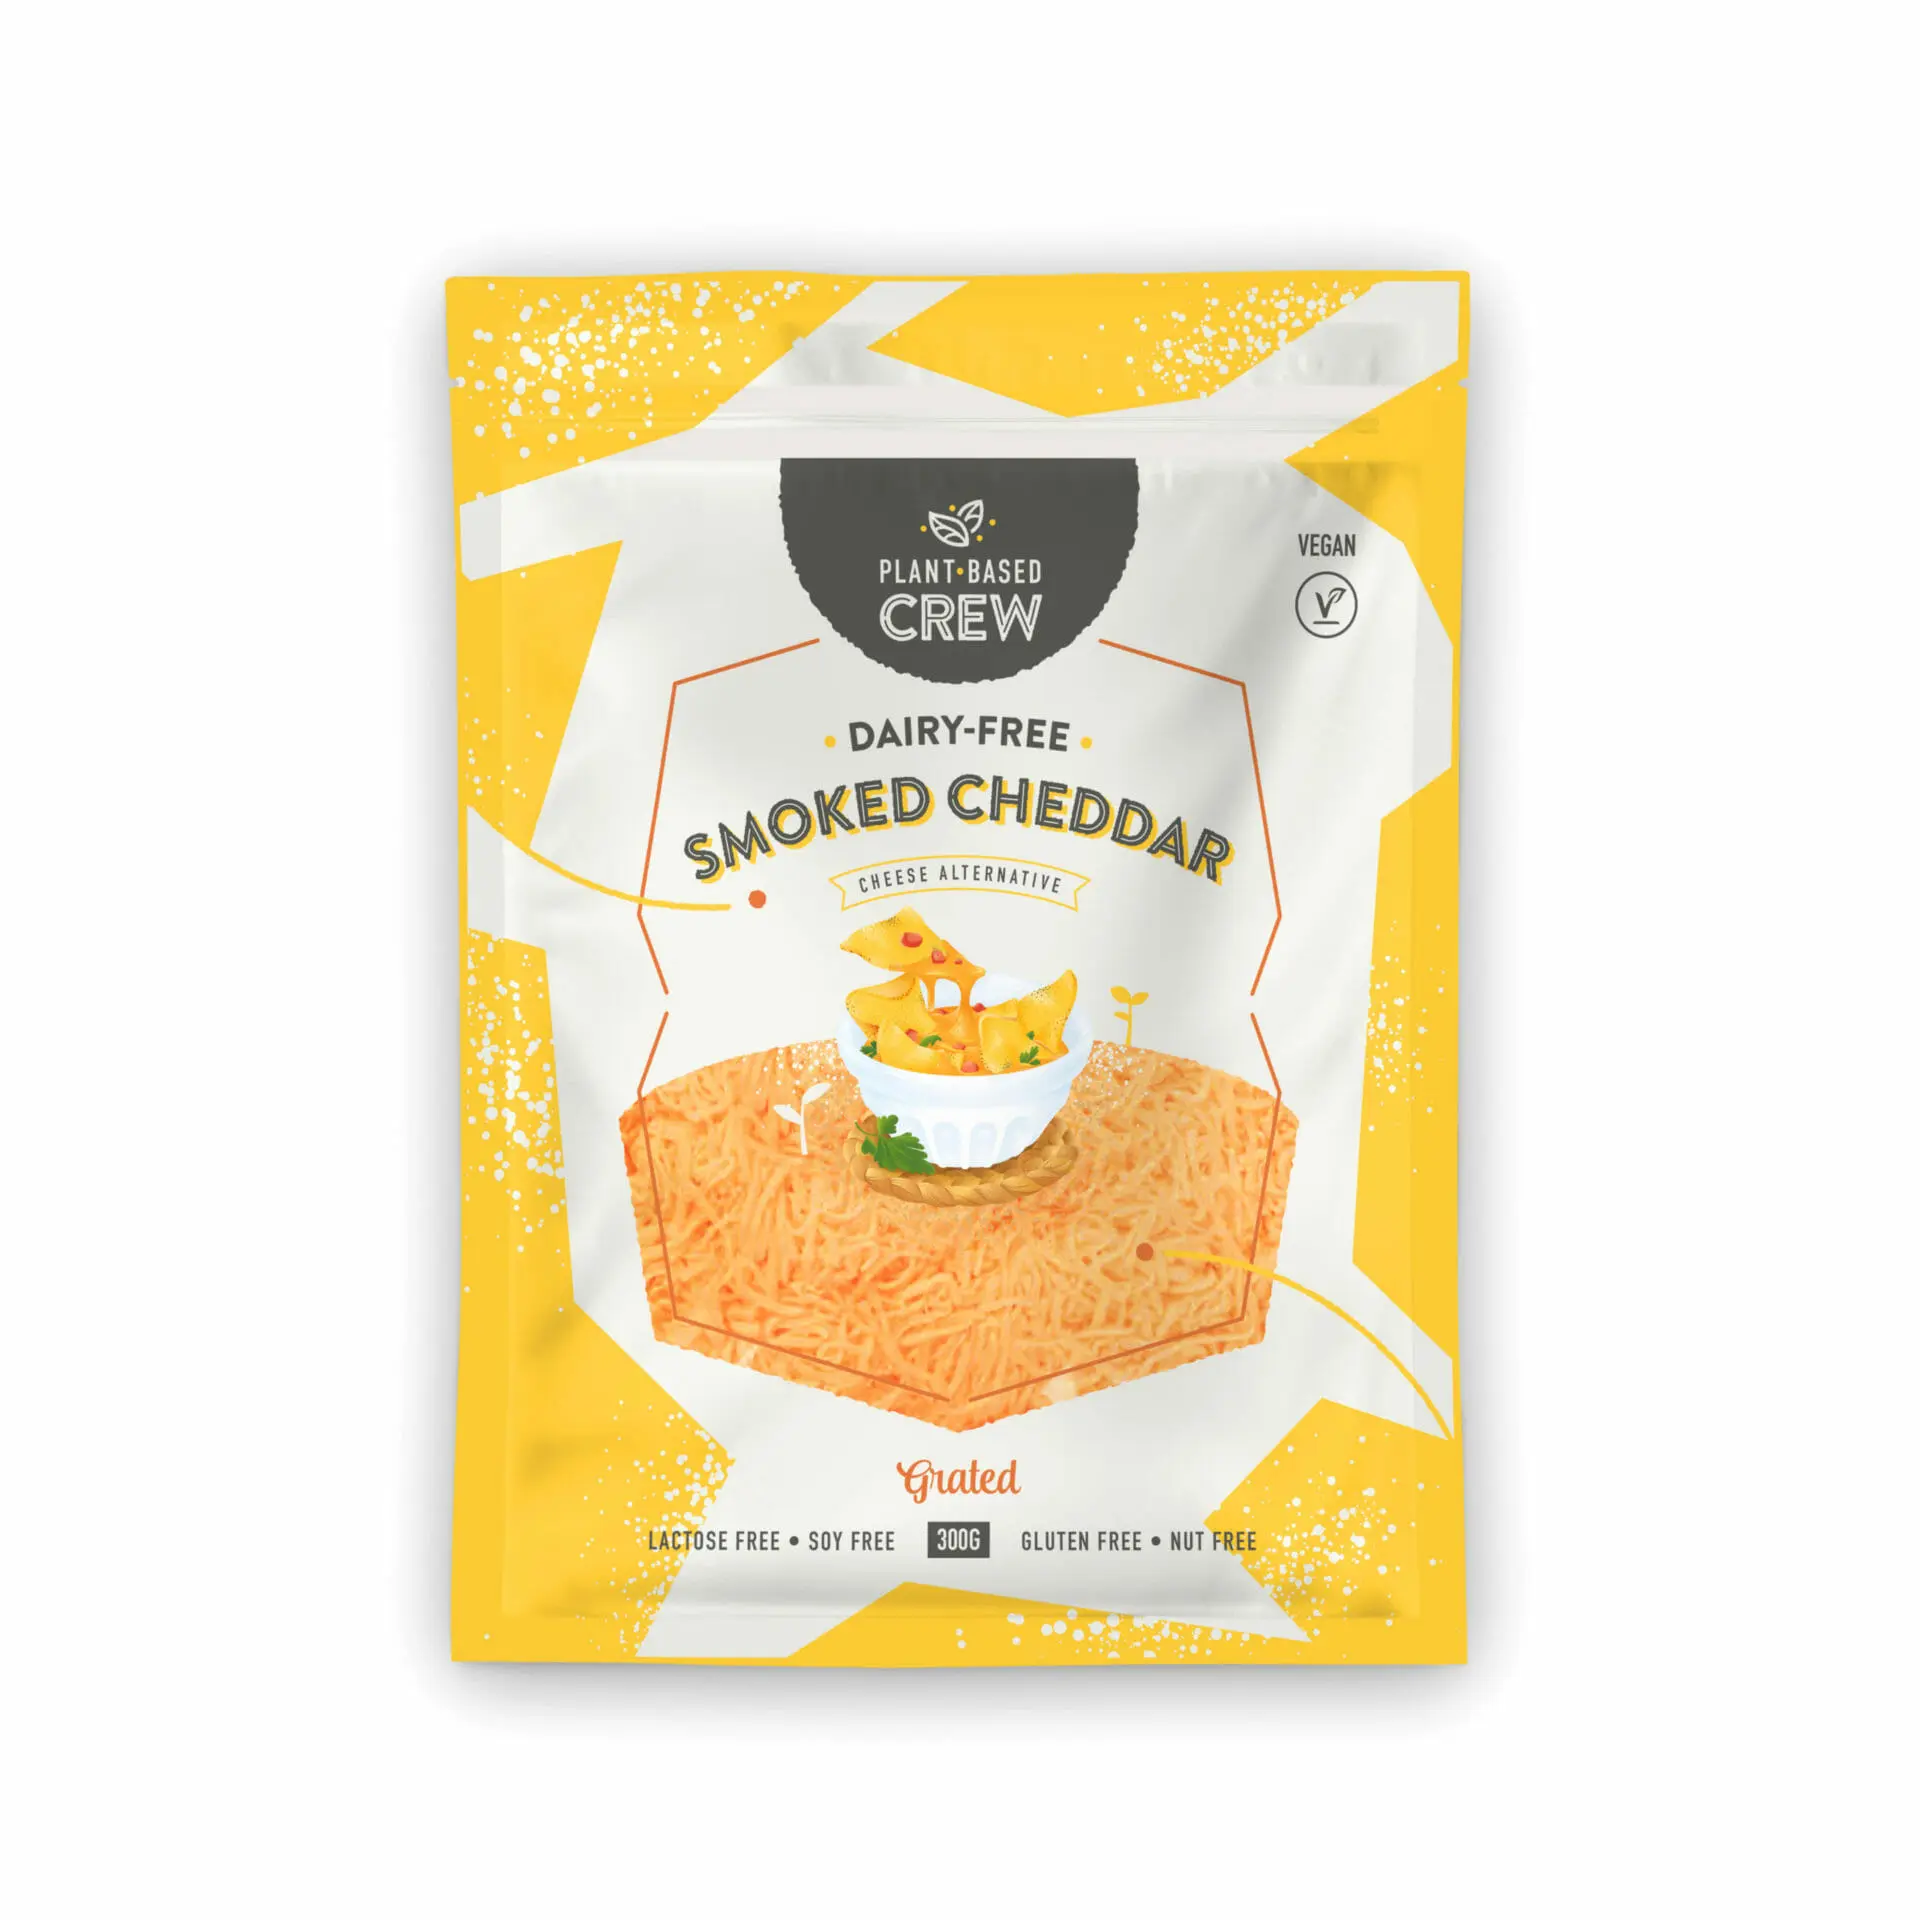 smoked cheddar cheese substitute - What is a good substitute for cheddar cheese